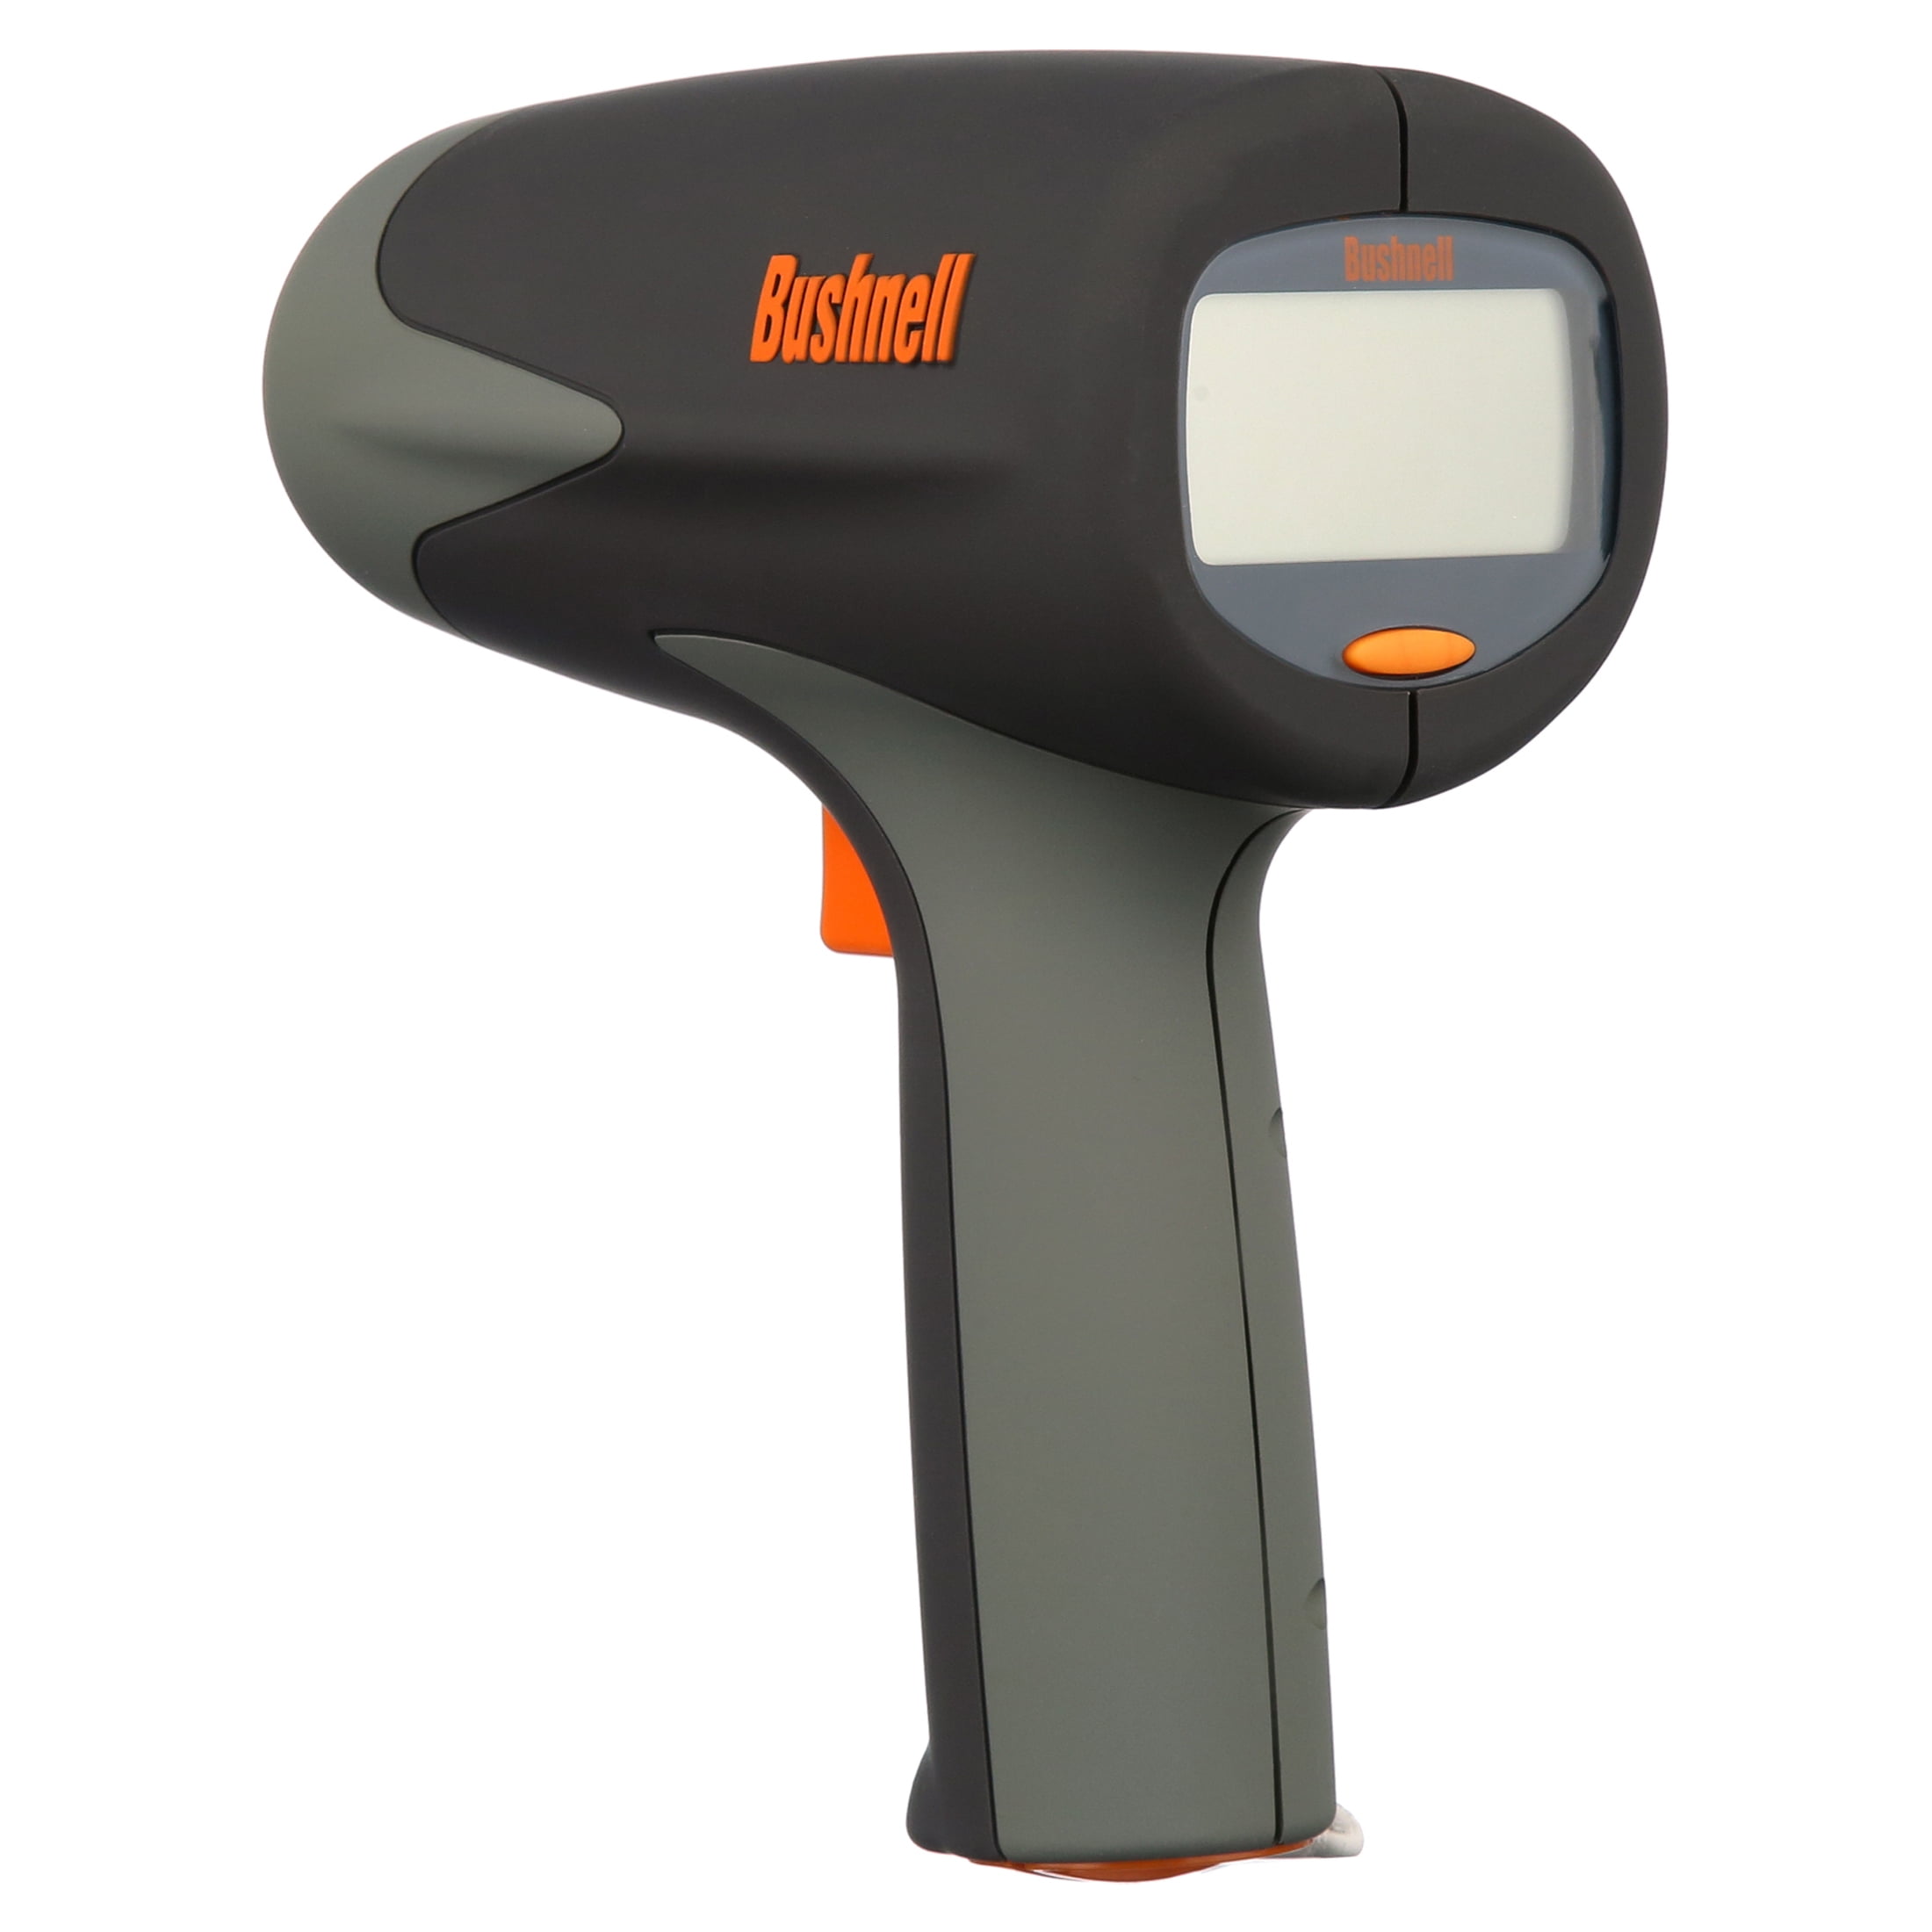 Bushnell Velocity Speed Gun for up to 175 KPH Baseball Tennis Sports Easy-to-use 